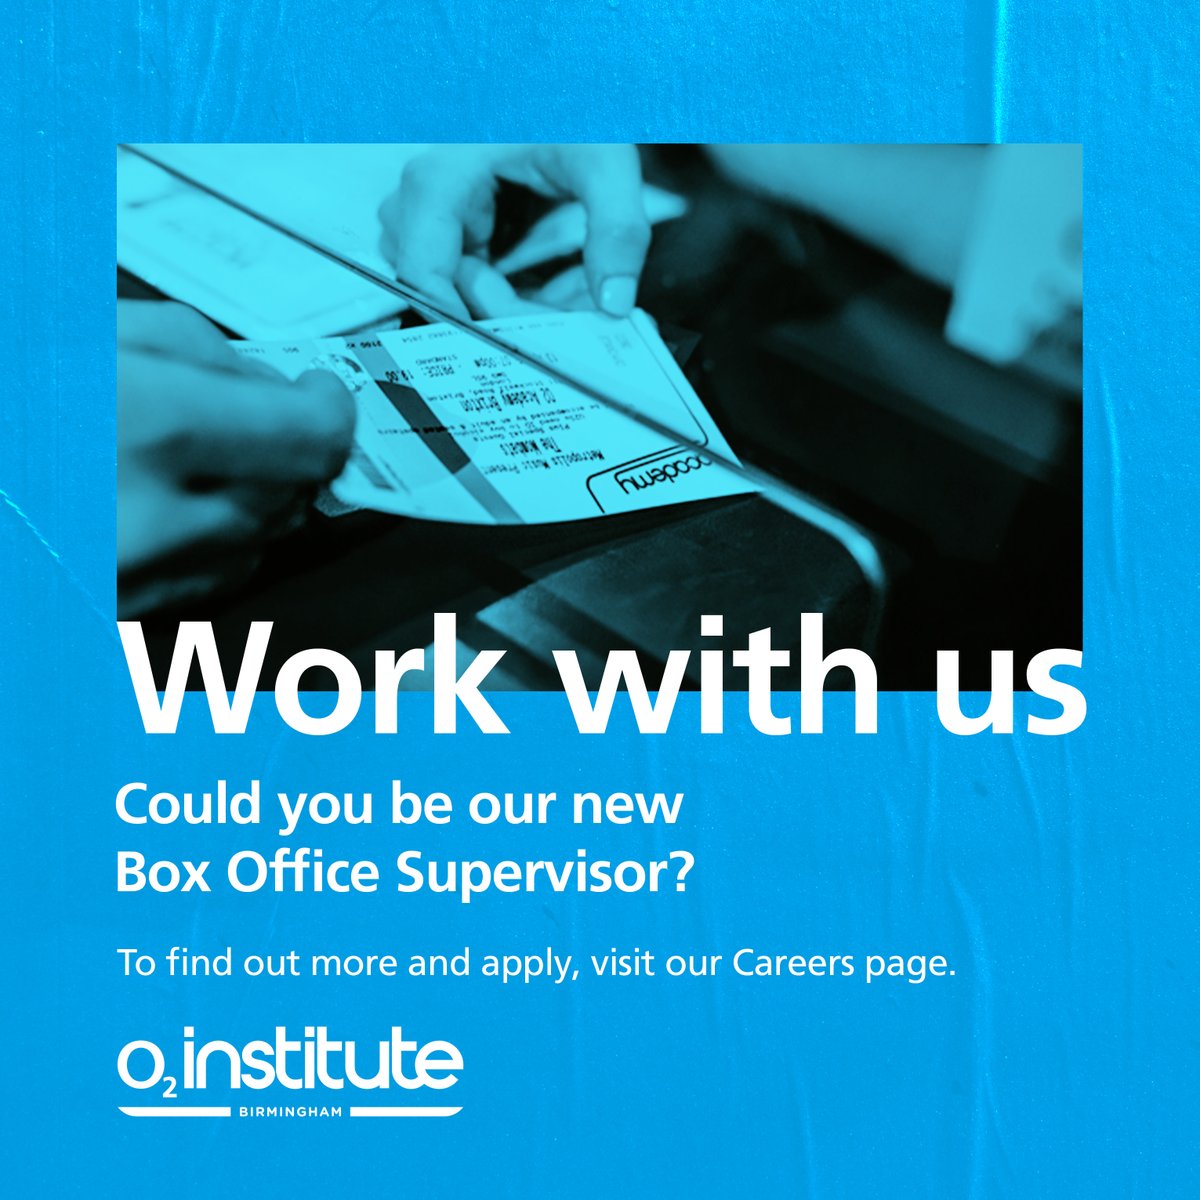 Fancy joining your favourite #Birmingham venue? We’re looking for a Box Office Supervisor to join our brilliant team, right here at O2 Institute Birmingham. To find out more and apply, please get in touch with your contact details and CV 👉 mail@o2institutebirmingham.co.uk 🙏